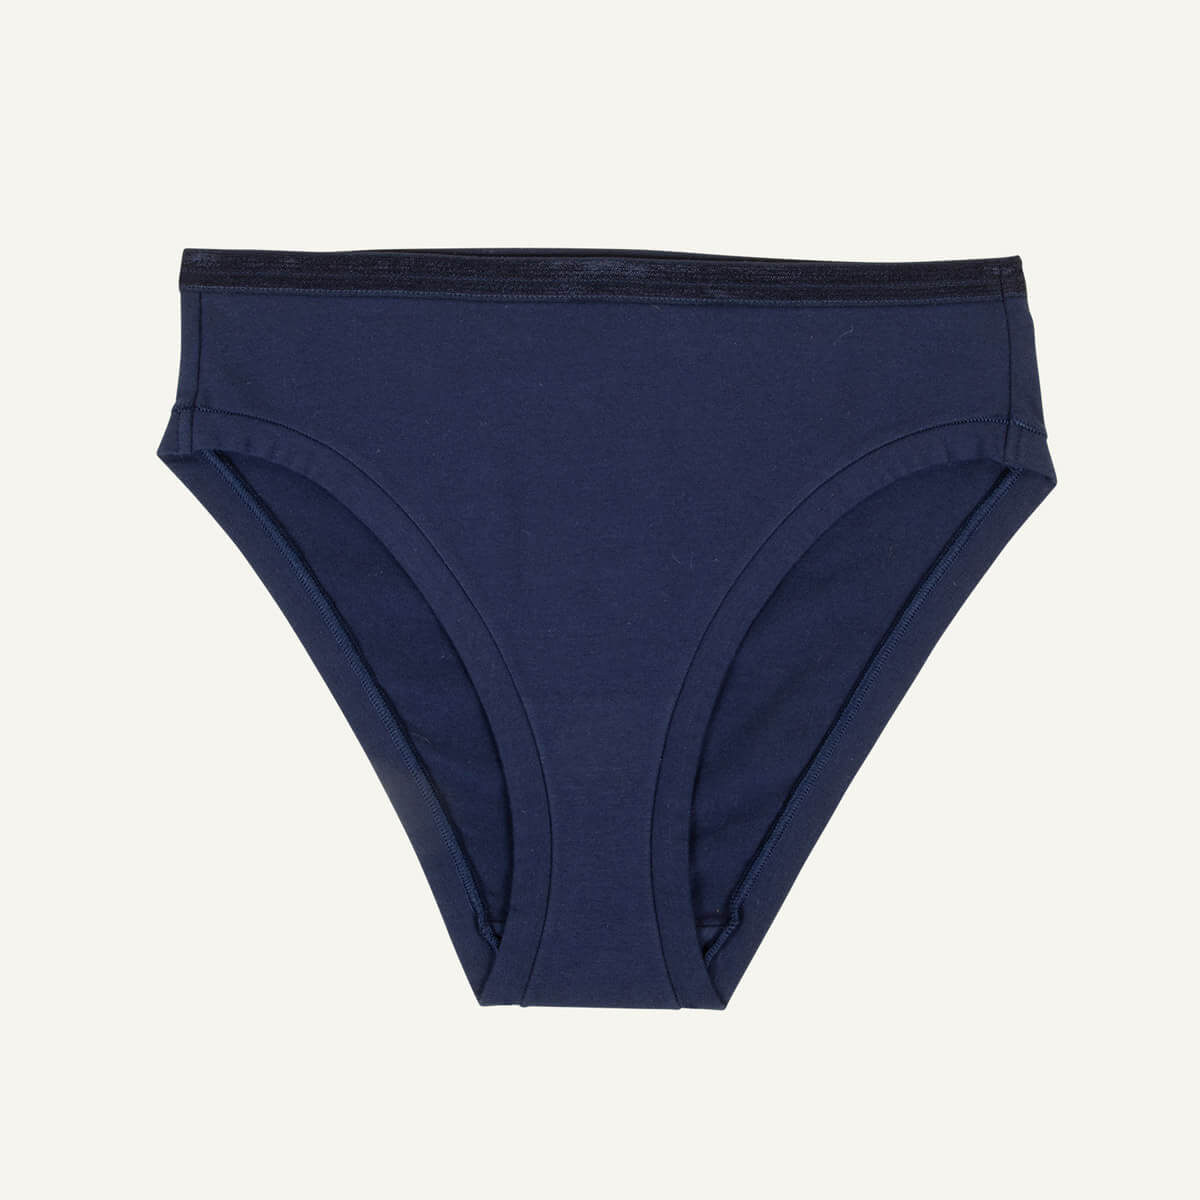 Subset Organic Cotton Mid-Rise Bikini: Available in sizes 2XS-3XL